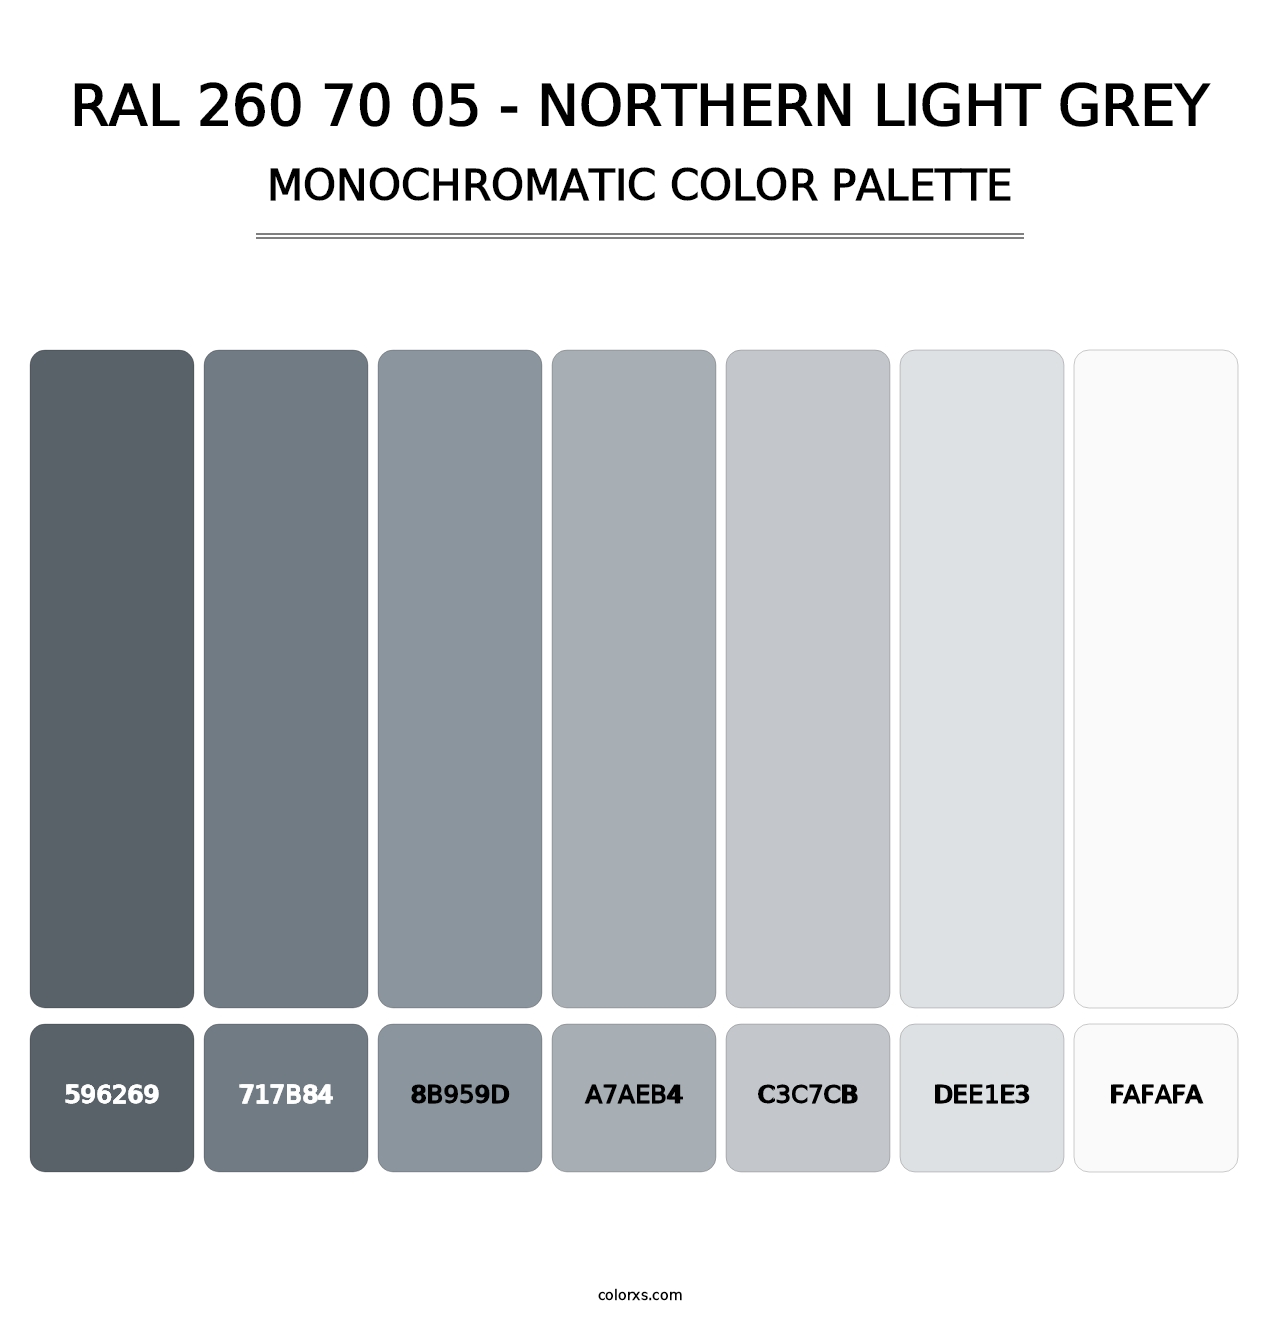 RAL 260 70 05 - Northern Light Grey - Monochromatic Color Palette